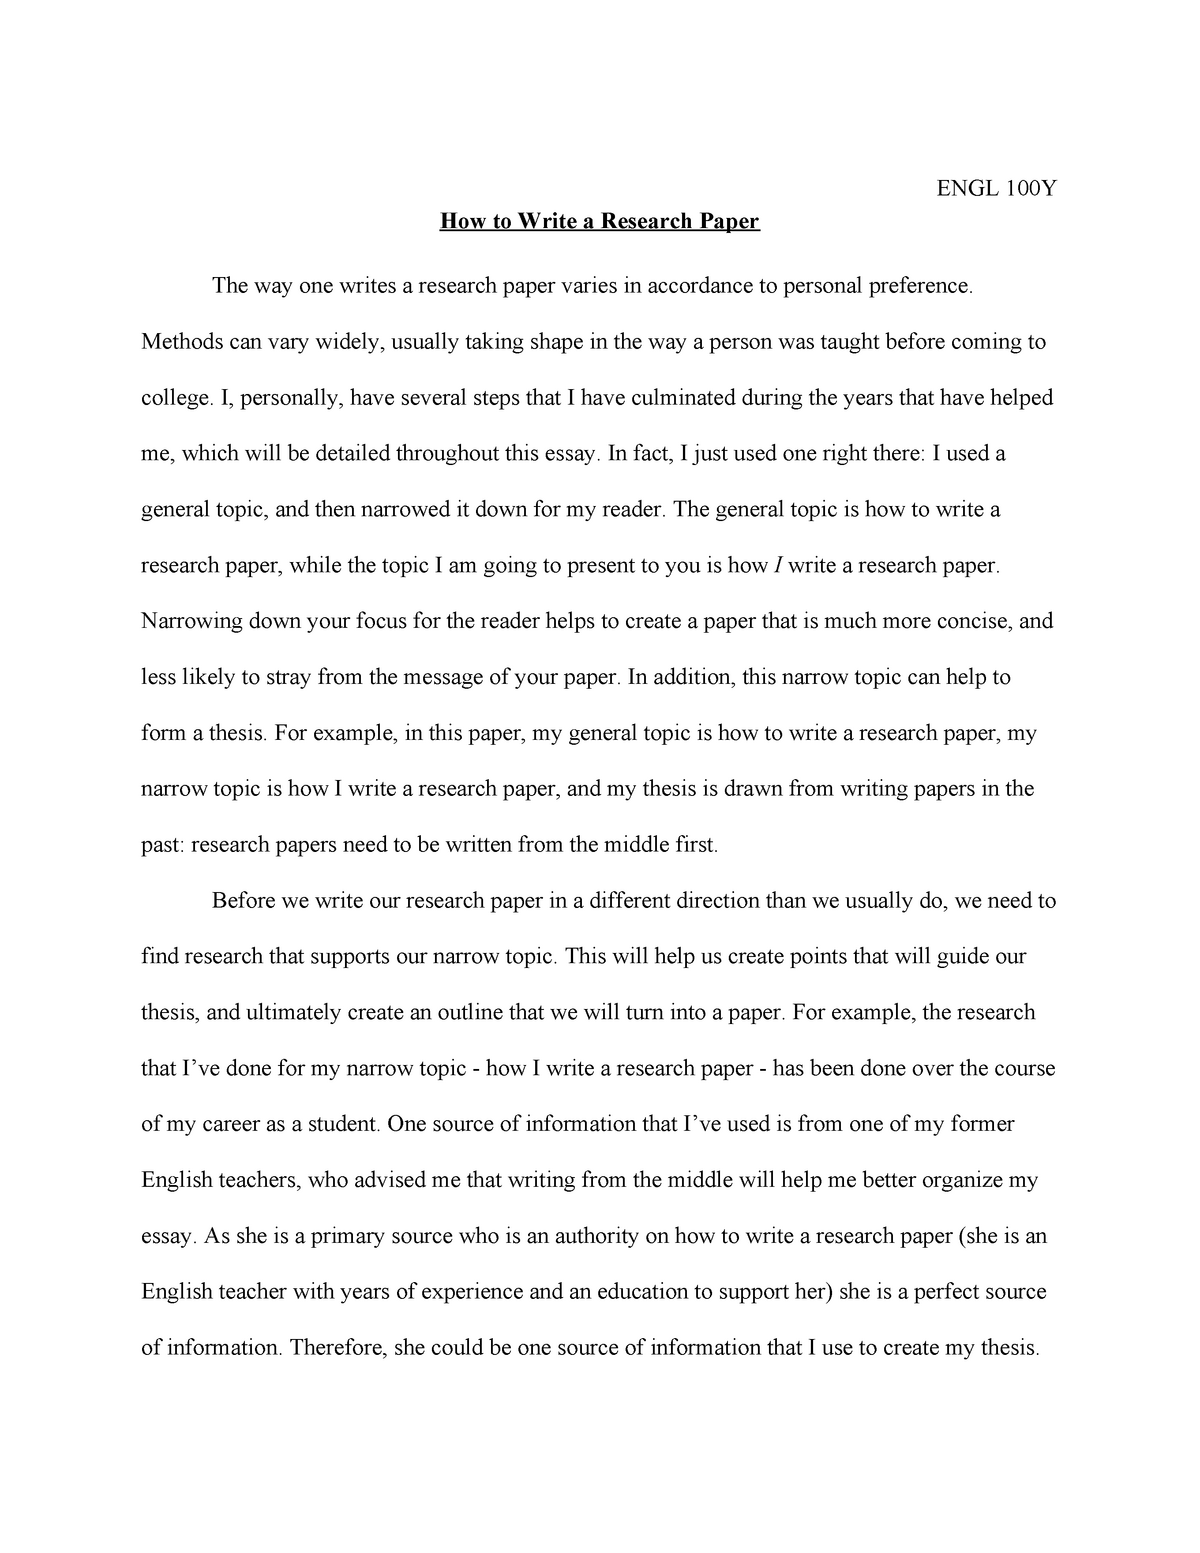 How to Write a Research Paper (Final Draft) - ENGL 21Y